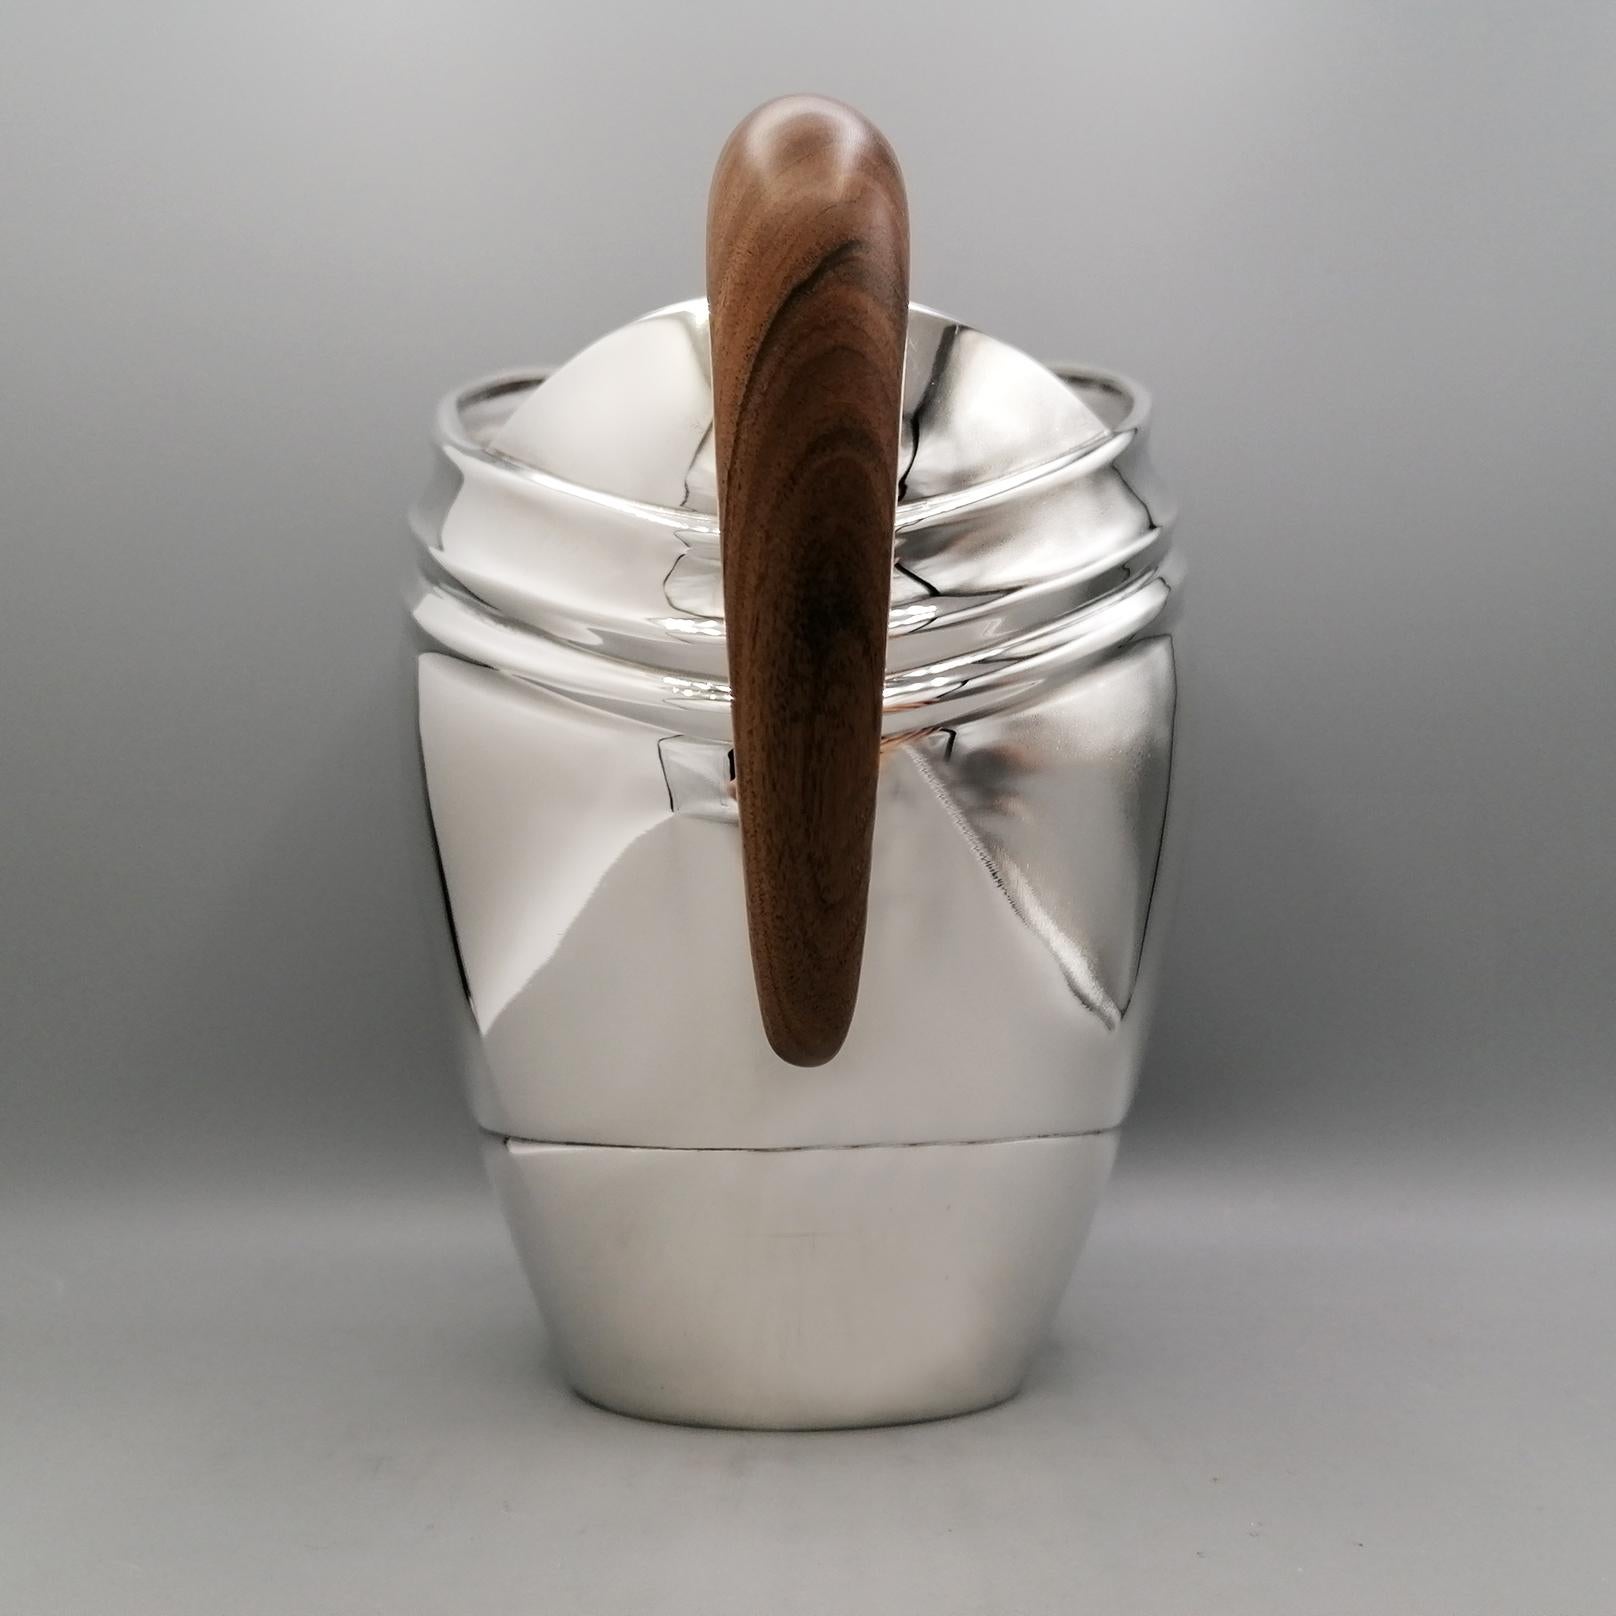 21st Century Italian Art Deco style Sterling Silver Water jug with wood handle For Sale 8